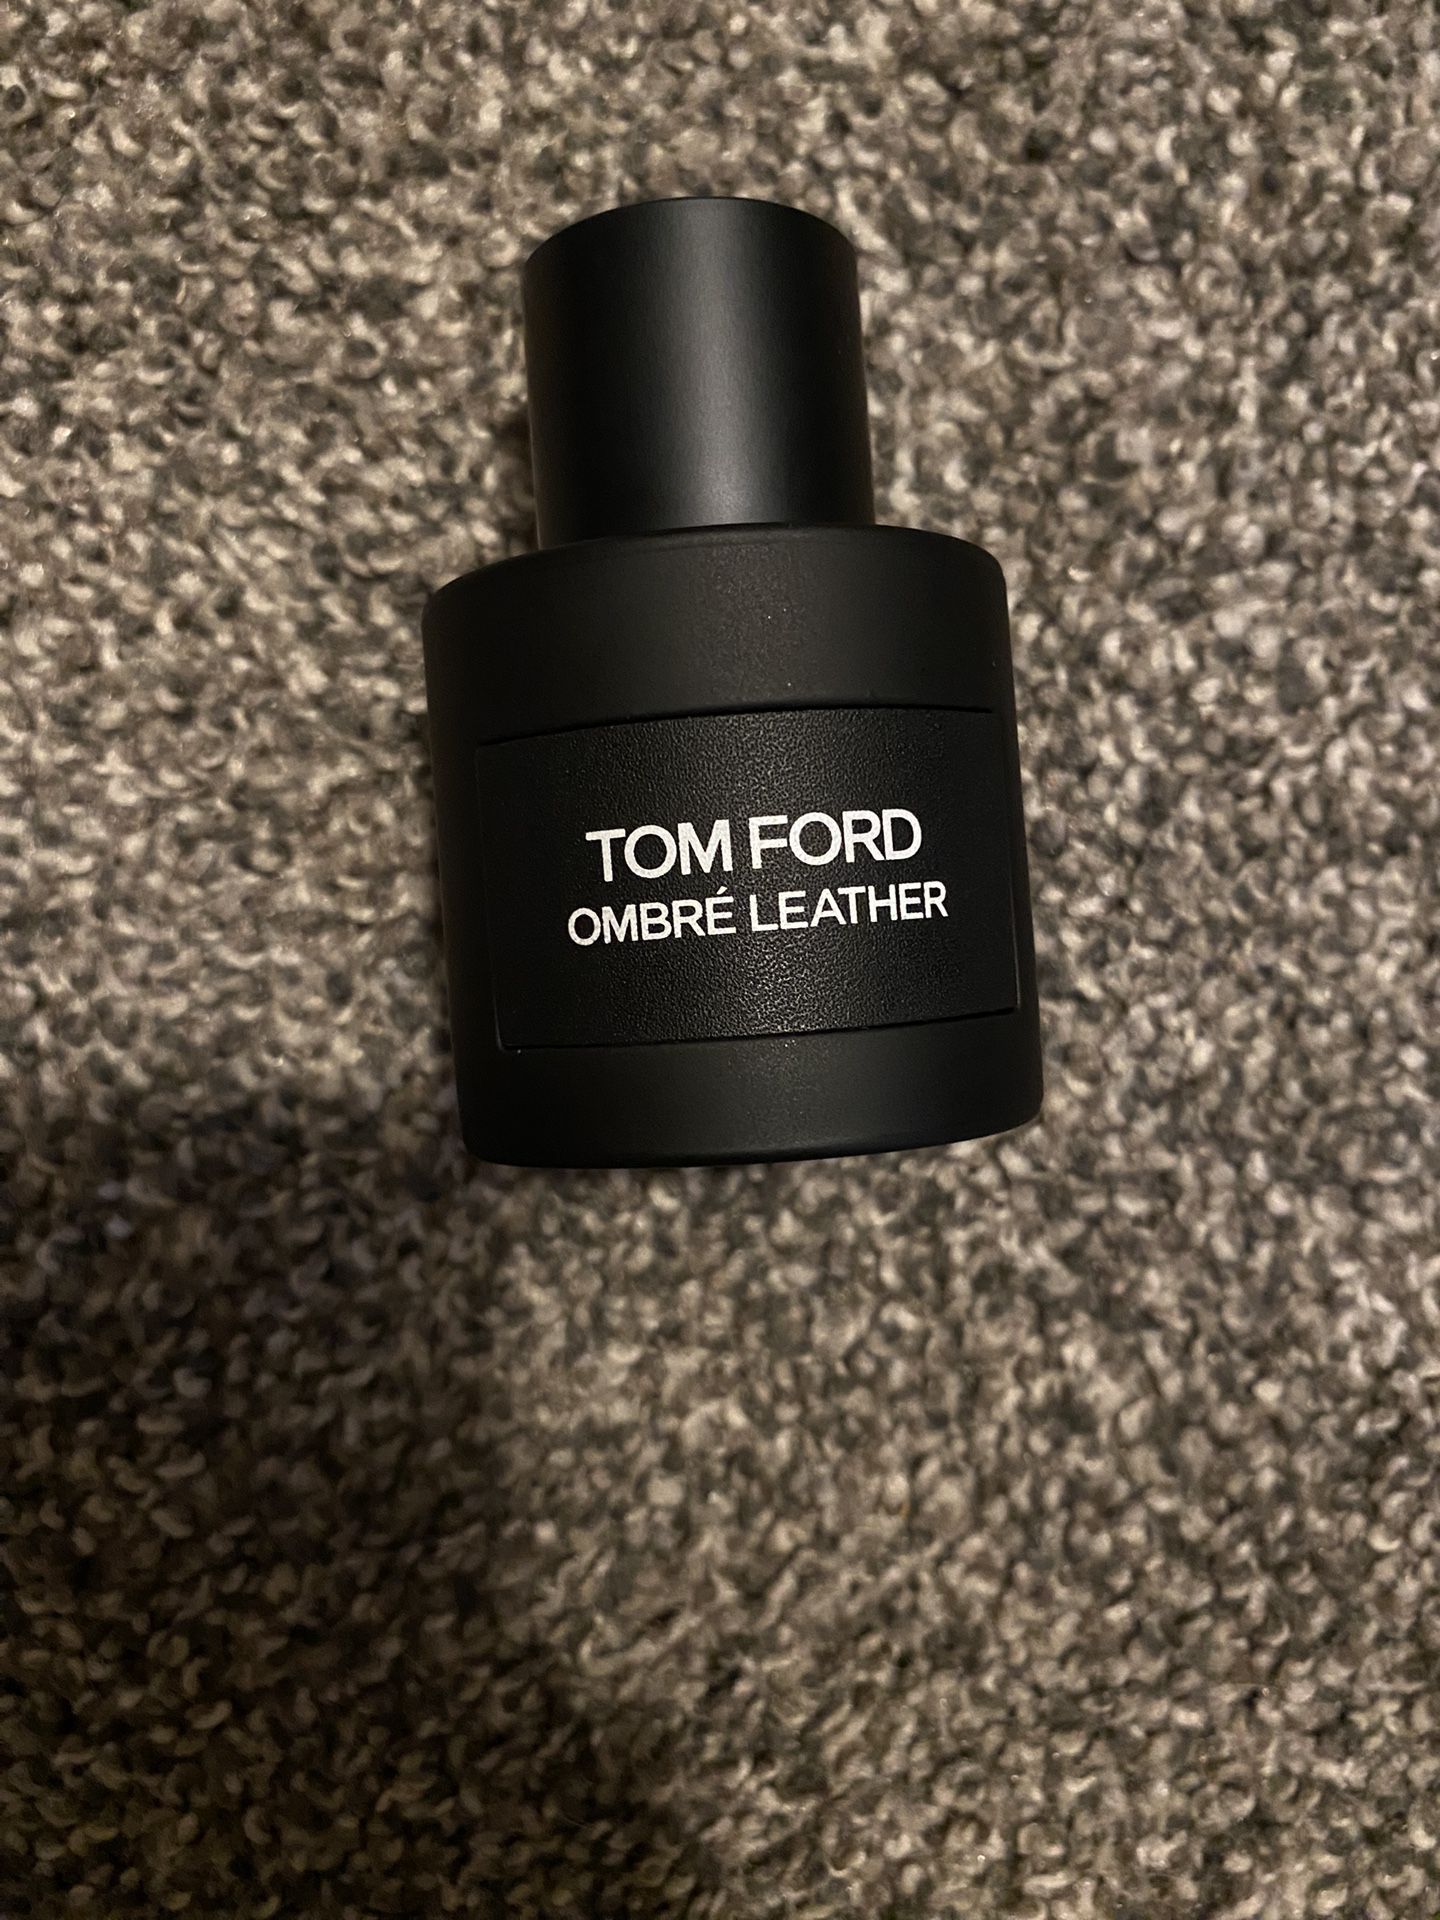 Tom Ford Ombre Leather Cologne 